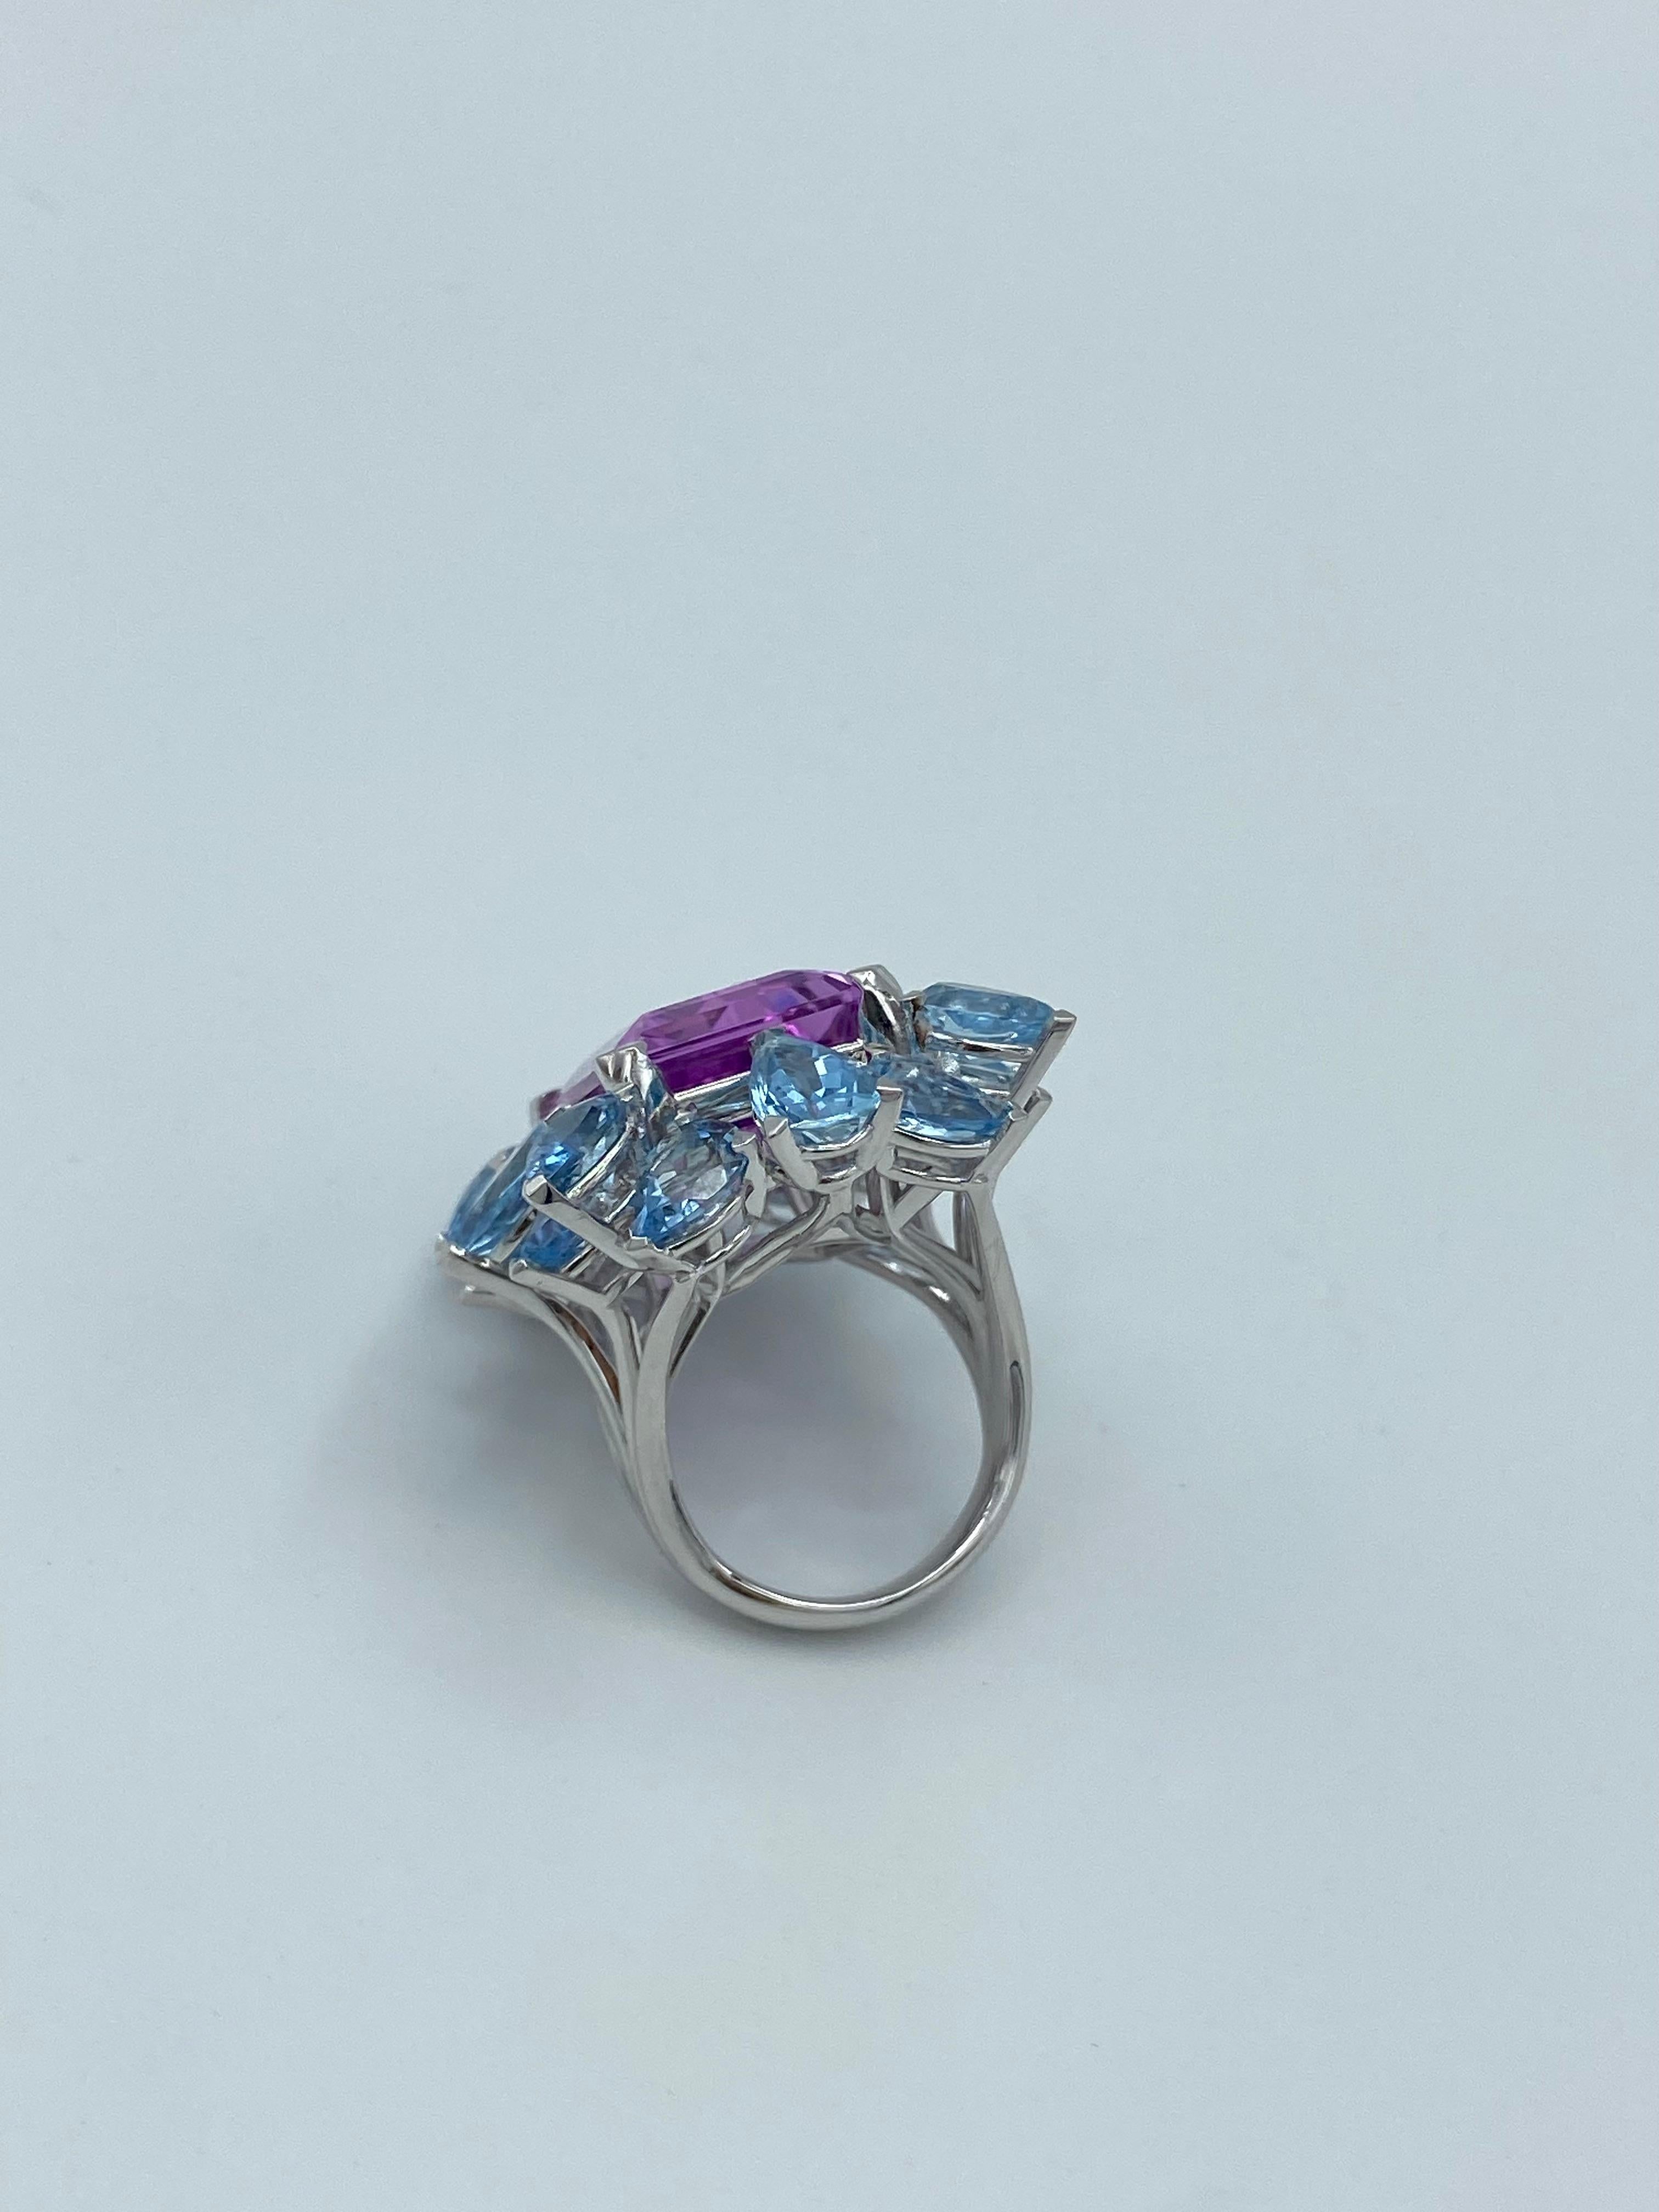 Aquamarine Emerald Cut Kunzite 18Kt White Gold Cocktail Ring In New Condition For Sale In Bussolengo, Verona